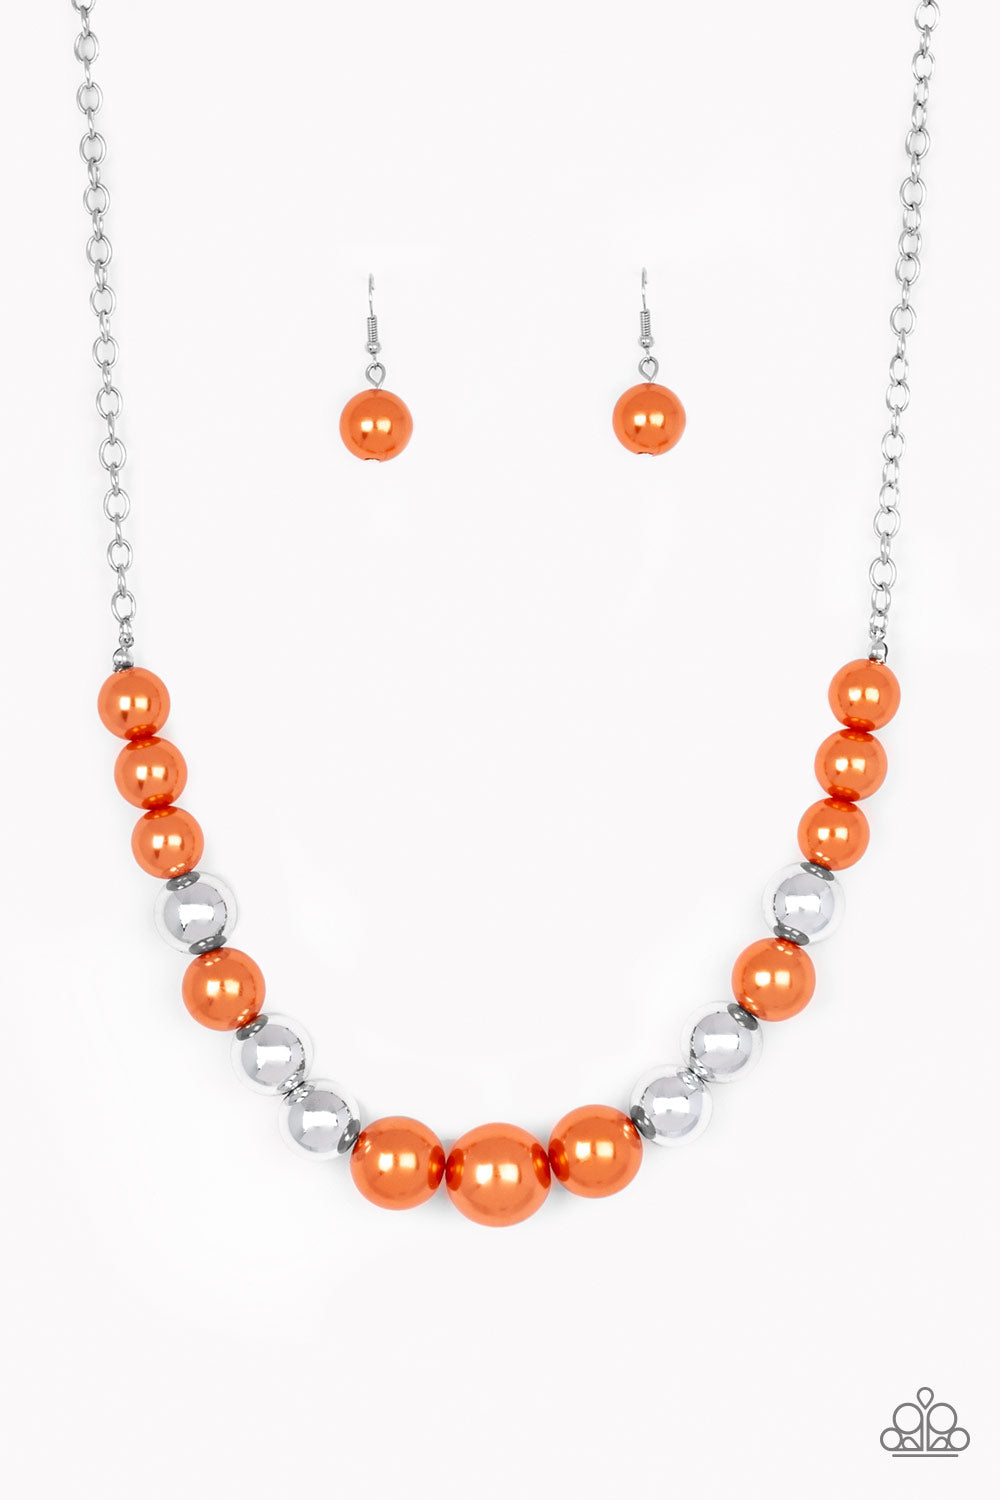 A collection of oversized silver and pearly orange beads drape across the chest for a refined look. Features an adjustable clasp closure.